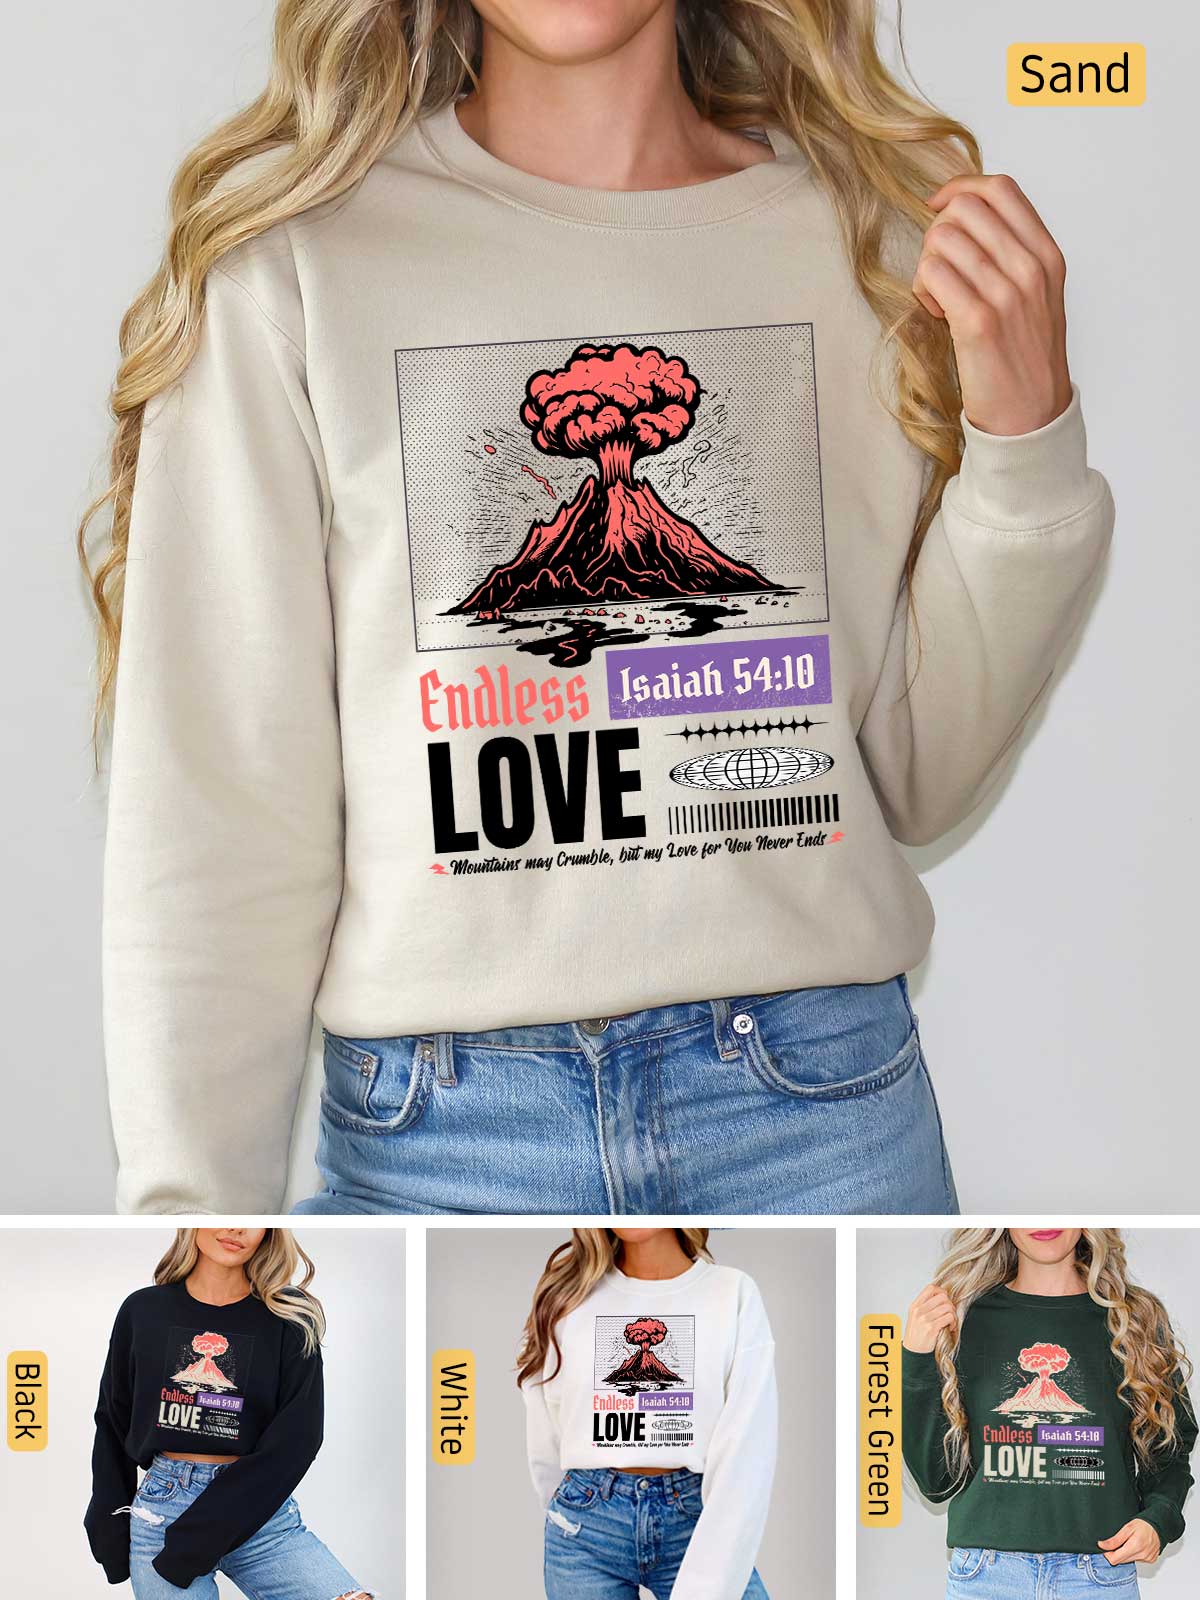 a woman wearing a sweatshirt with the words love on it